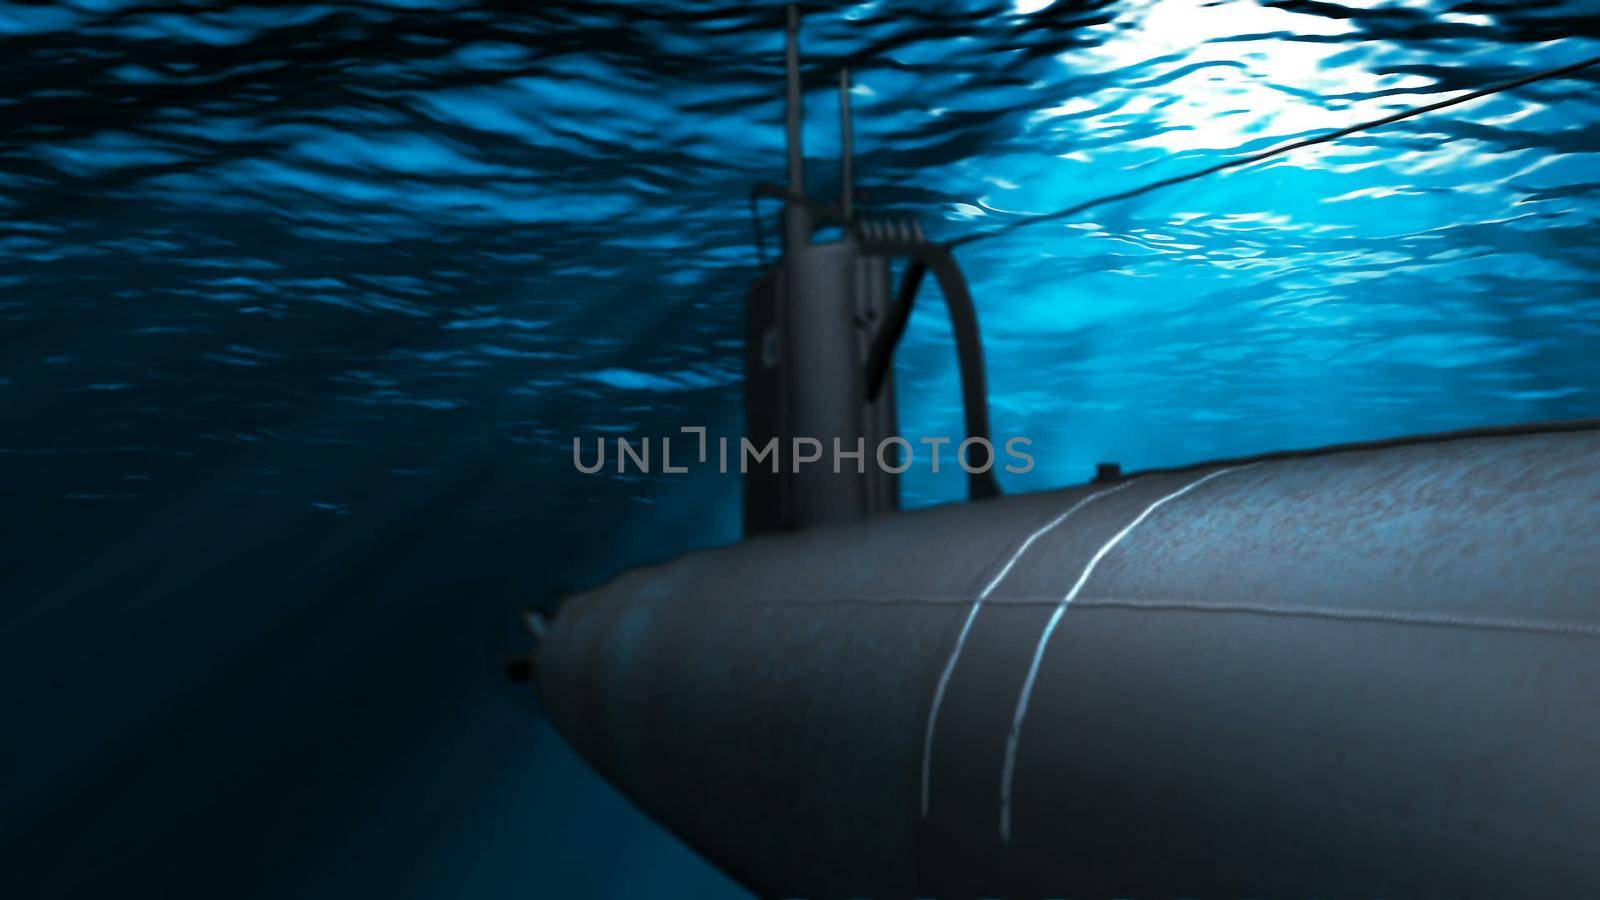 Submarine floats in a deep water, Nice Background